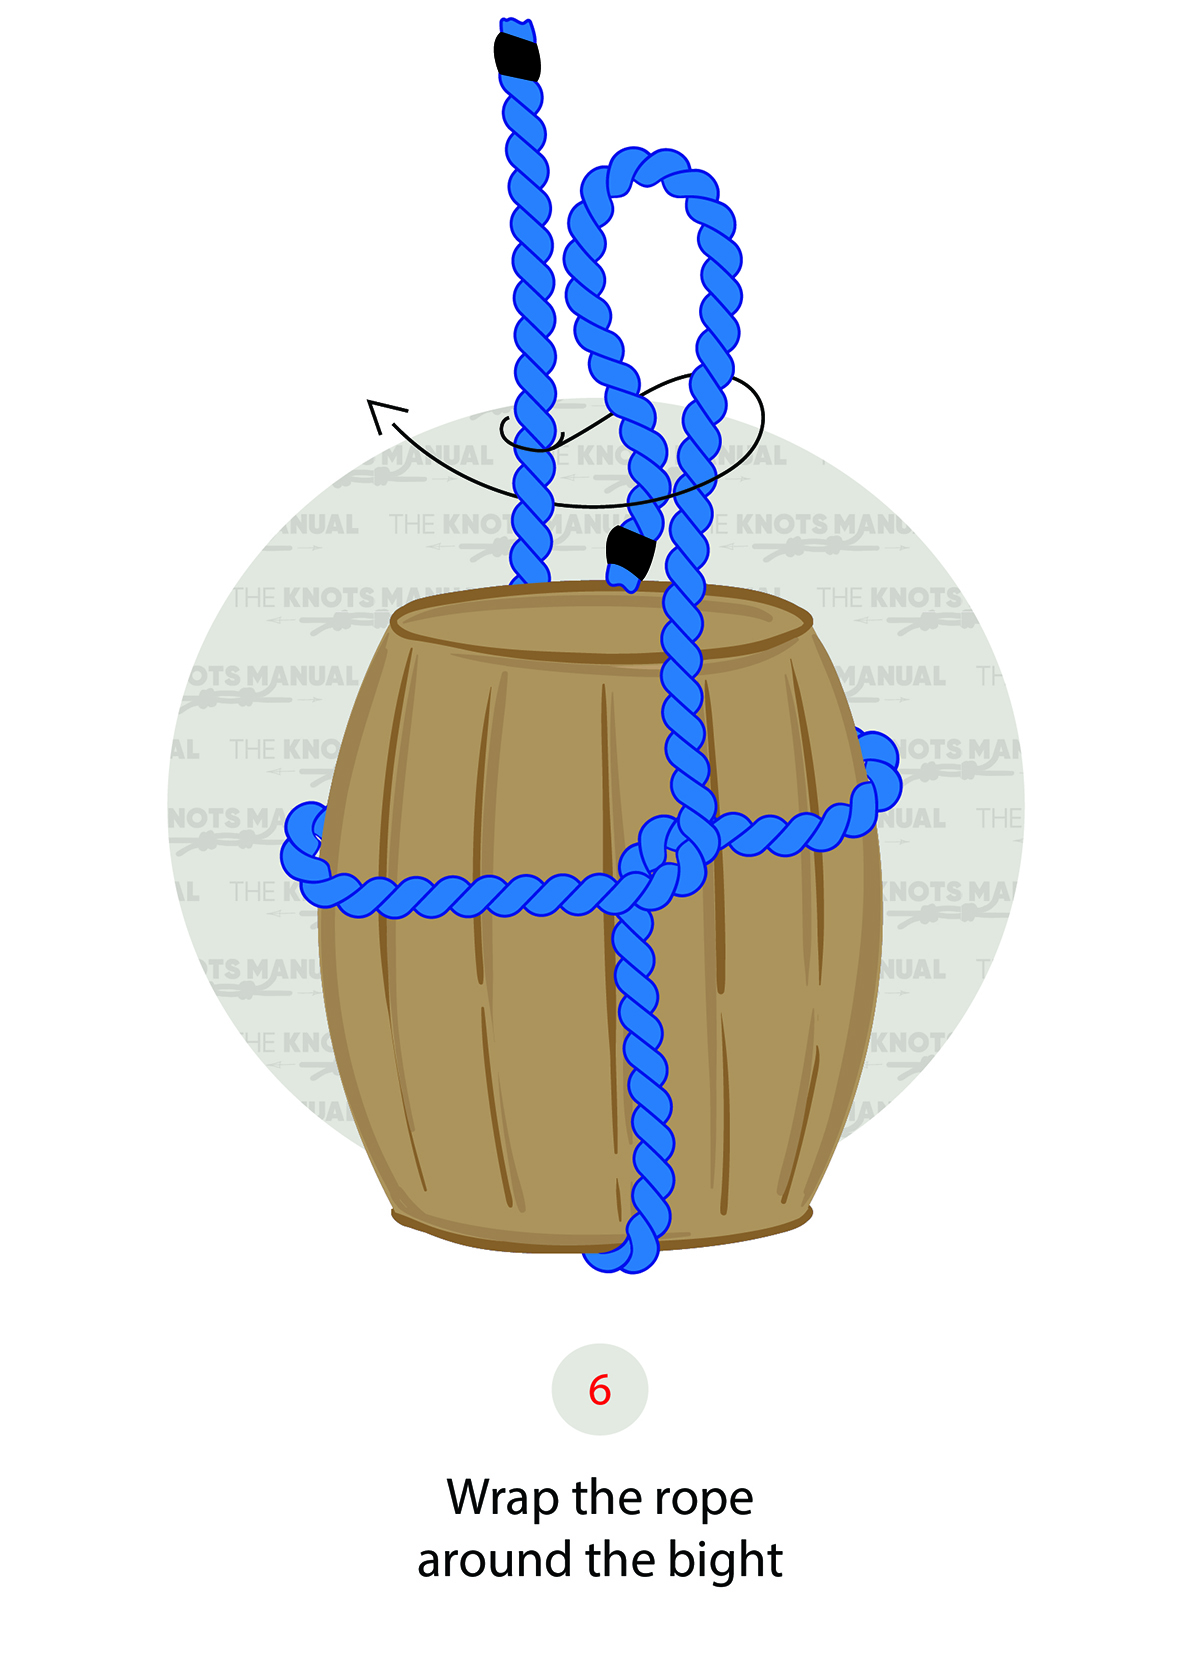 How to Tie a Barrel Knot 